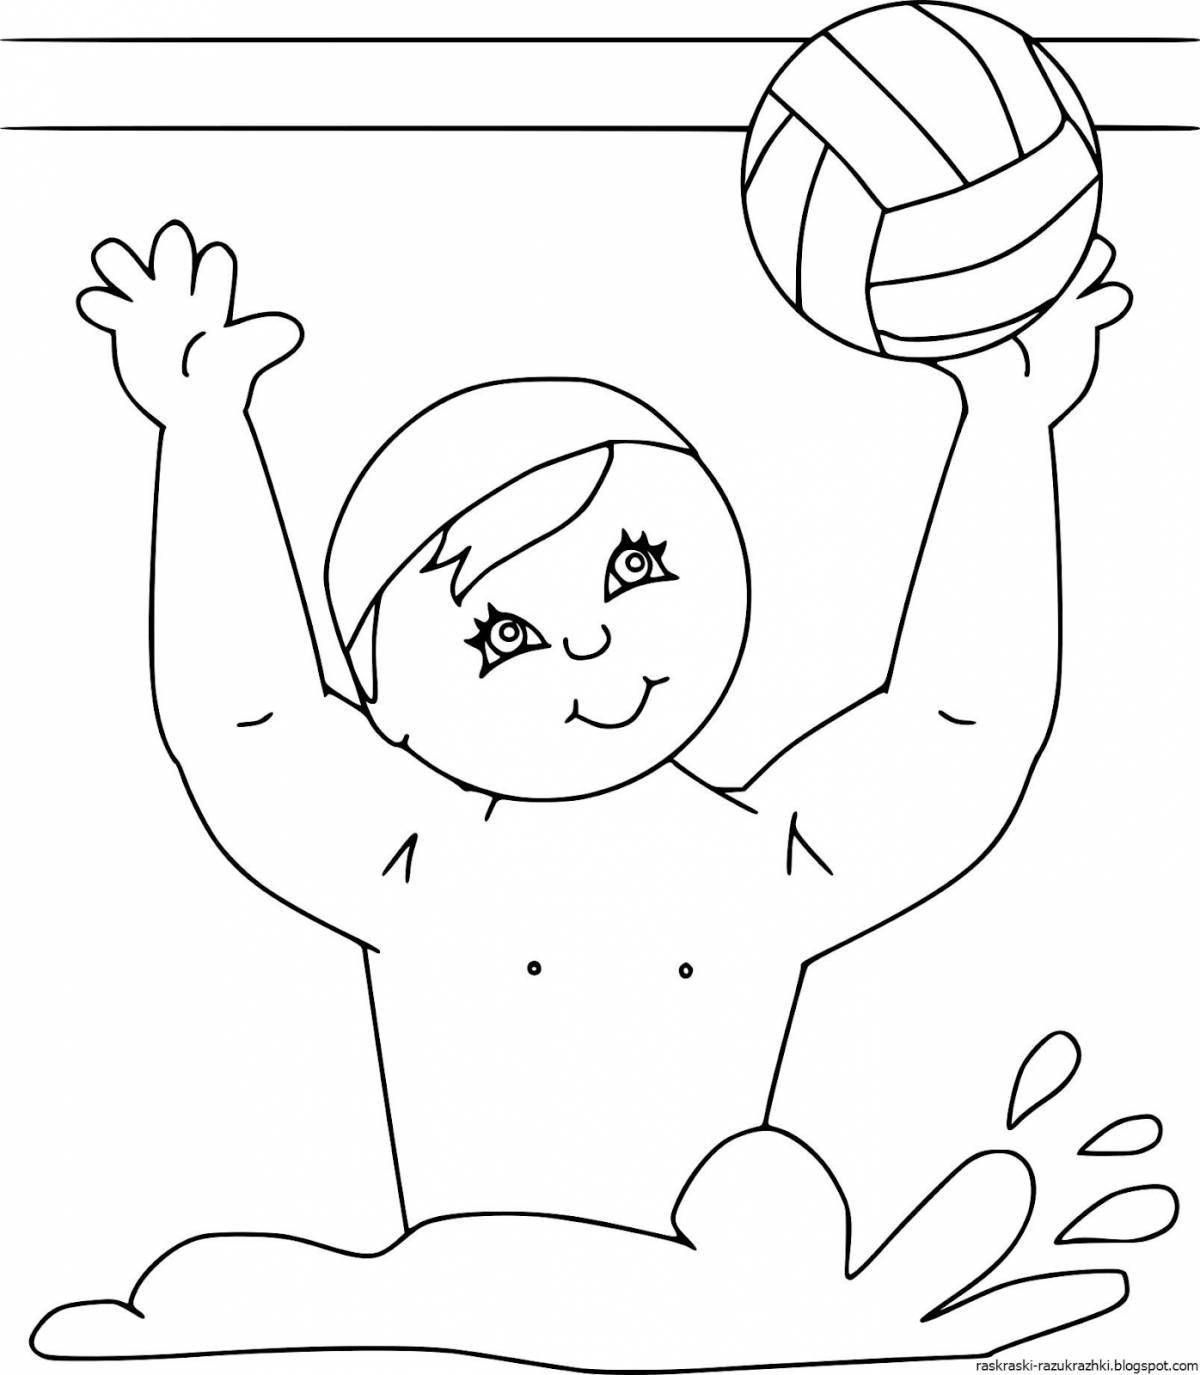 Great sports coloring book for kids 5-6 years old